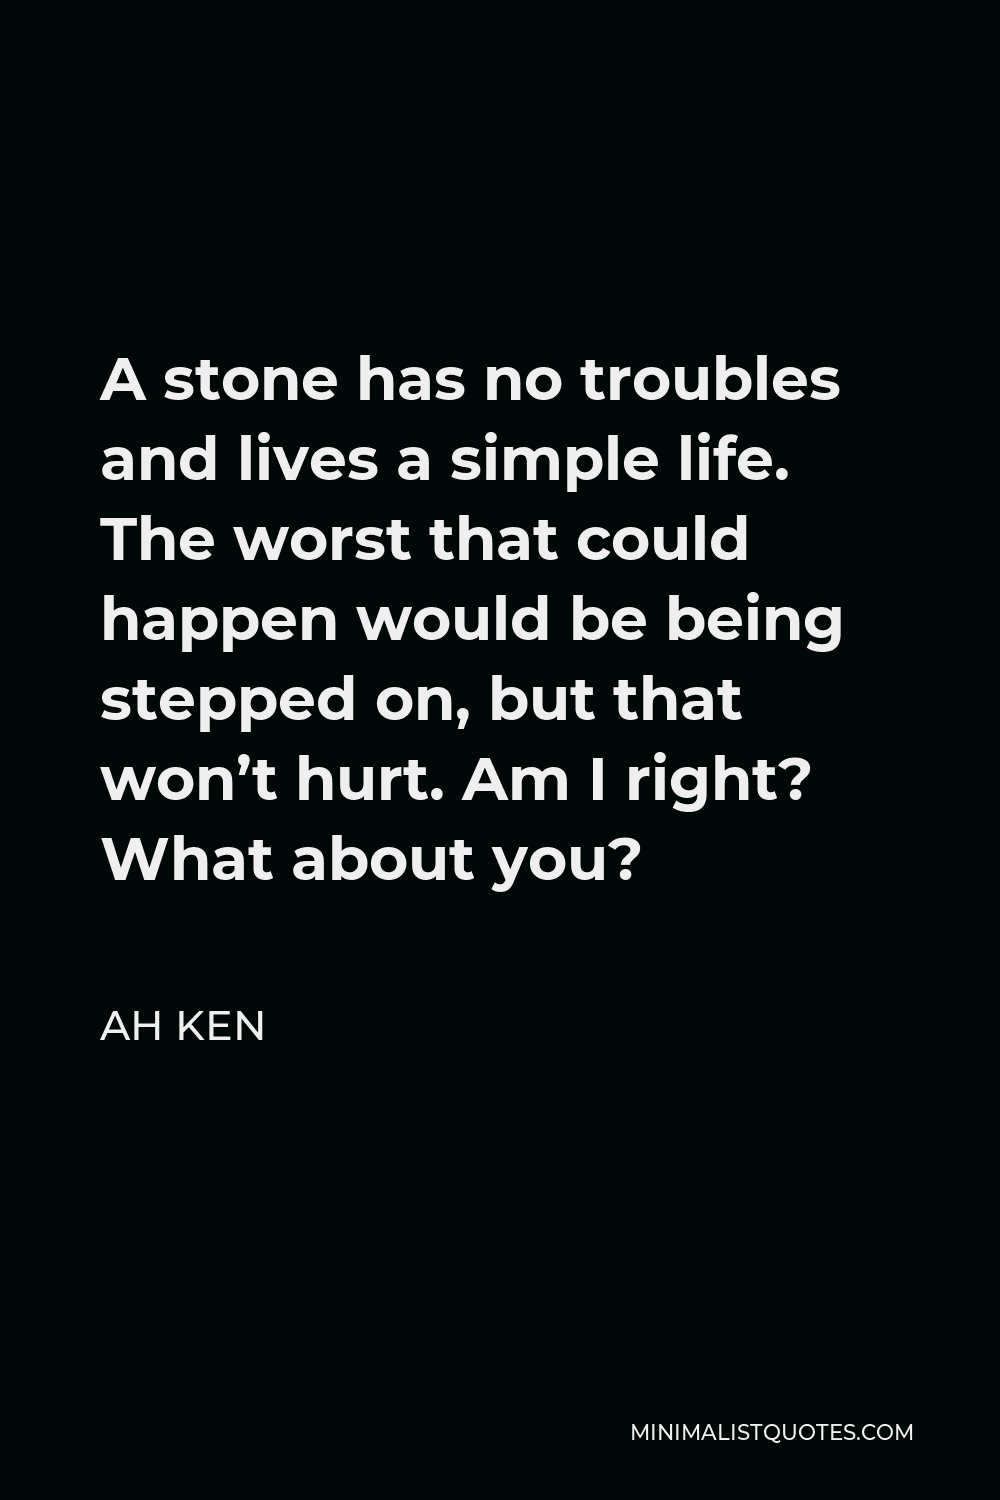 Ah Ken Quote - A stone has no troubles and lives a simple life. The worst that could happen would be being stepped on, but that won’t hurt. Am I right? What about you?